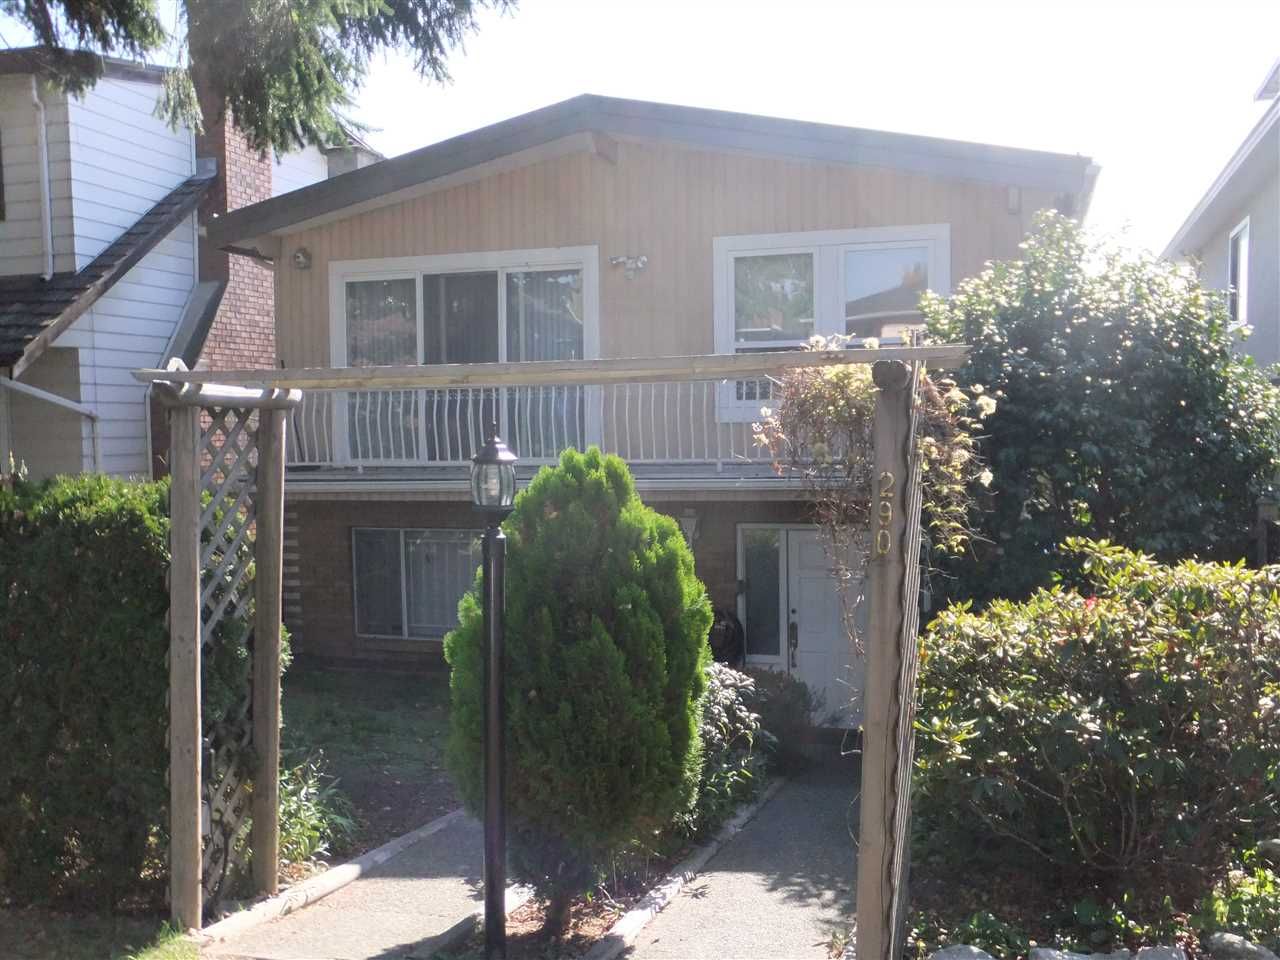 Main Photo: 290 W 63RD AVENUE in Vancouver: Marpole VW House for sale (Vancouver West)  : MLS®# R2005496